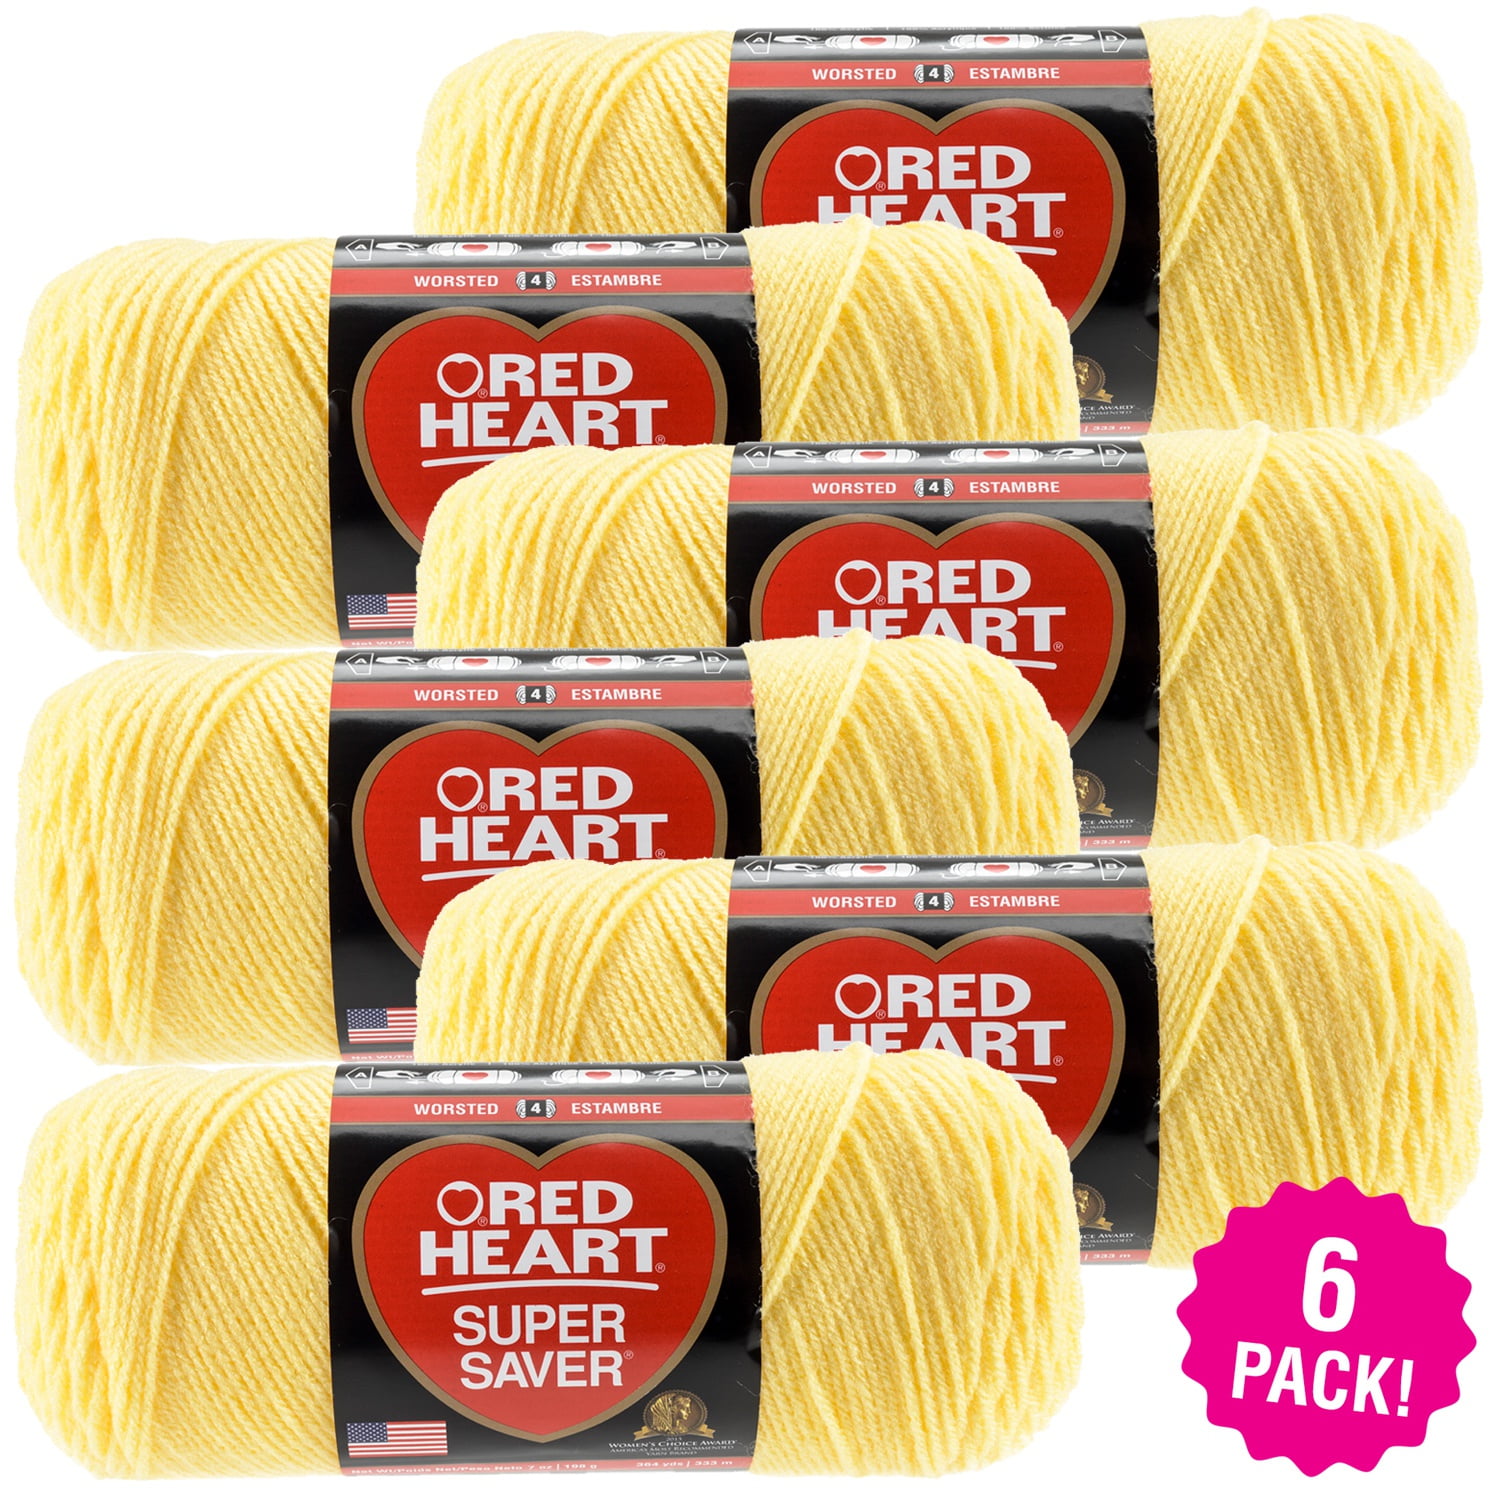 Red Heart Multipack of 6 White Super Saver Yarn 